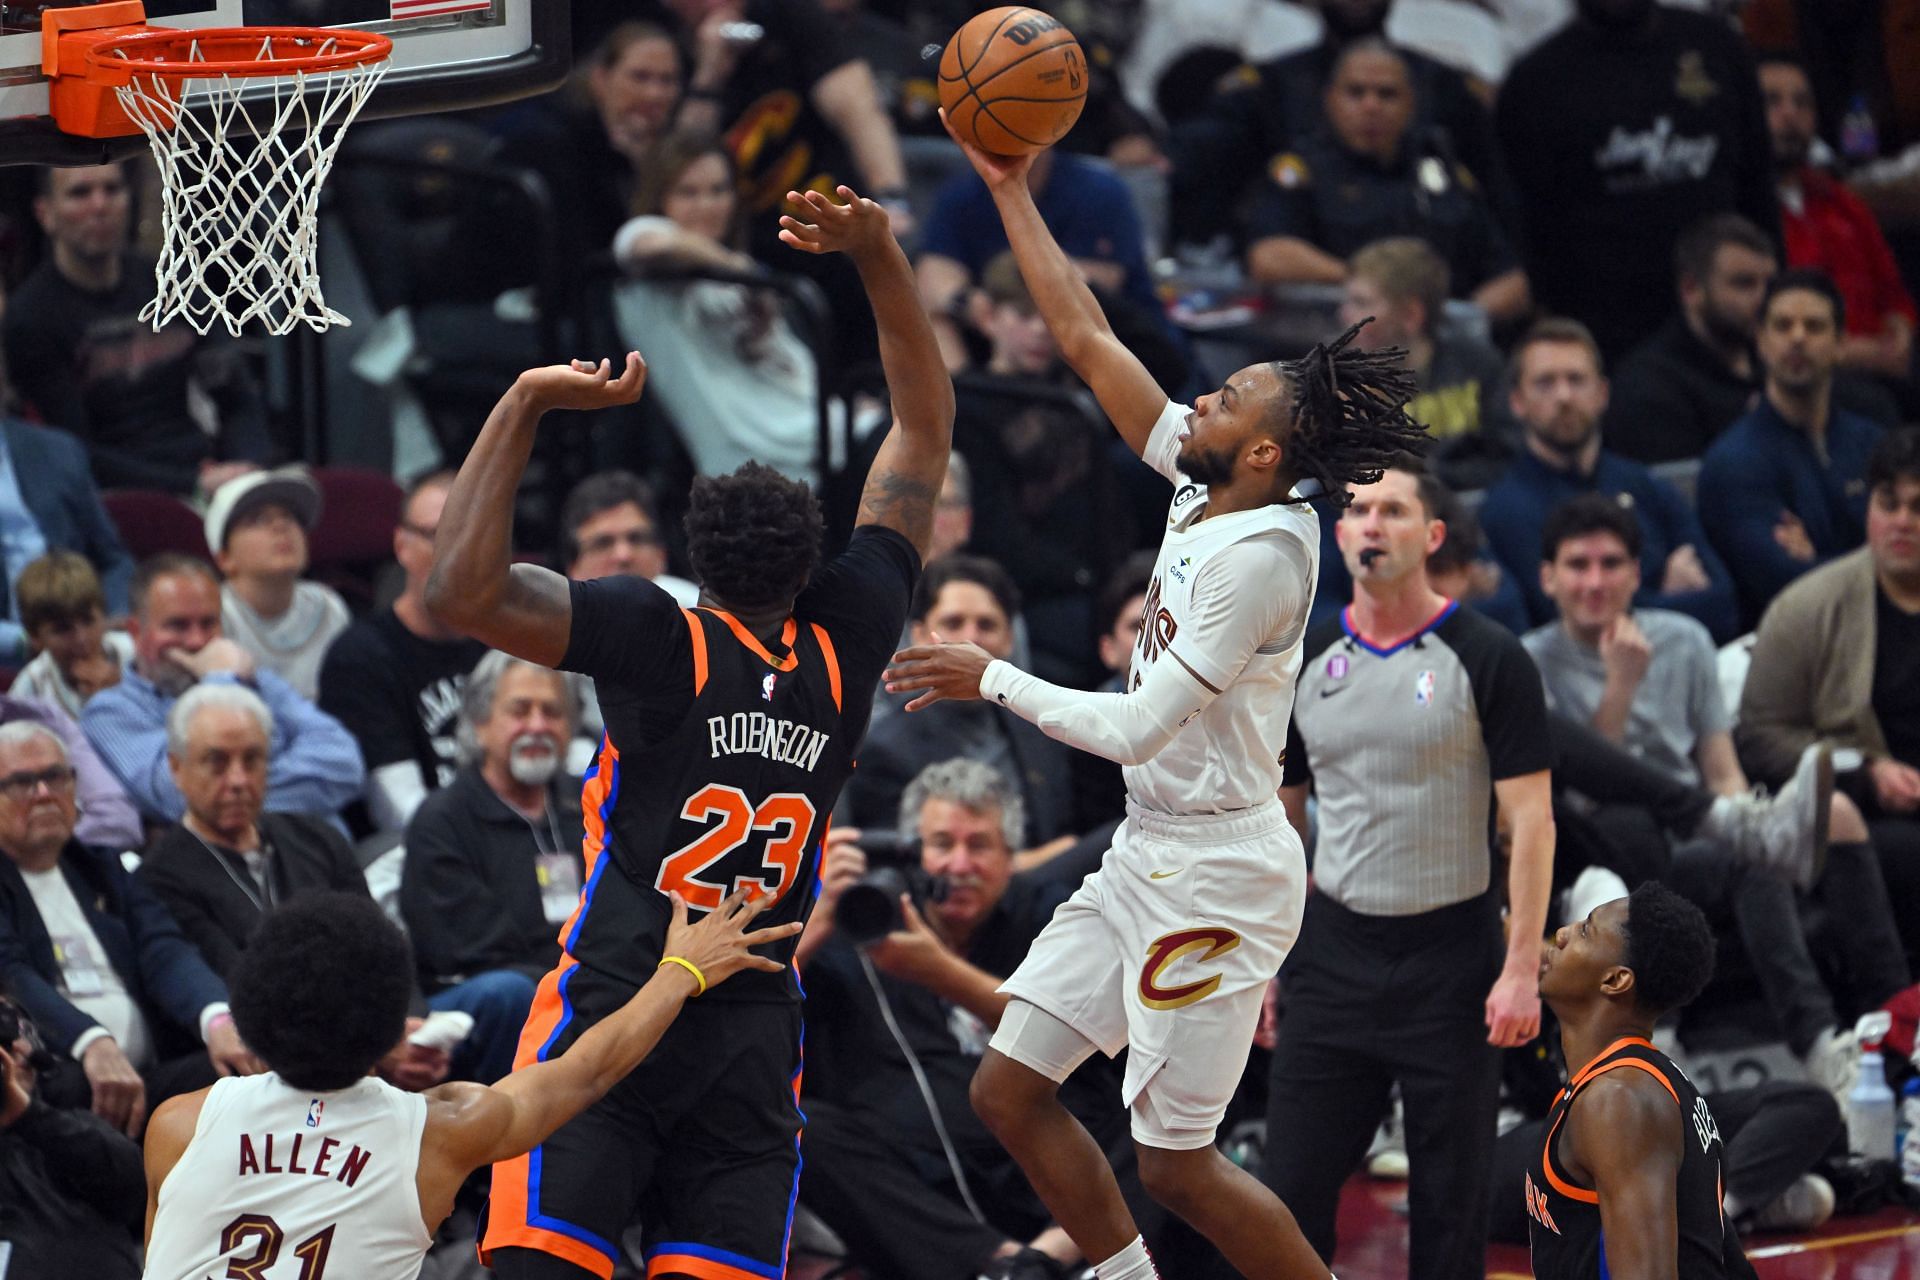 New York Knicks vs. Cleveland Cavaliers - Game 2